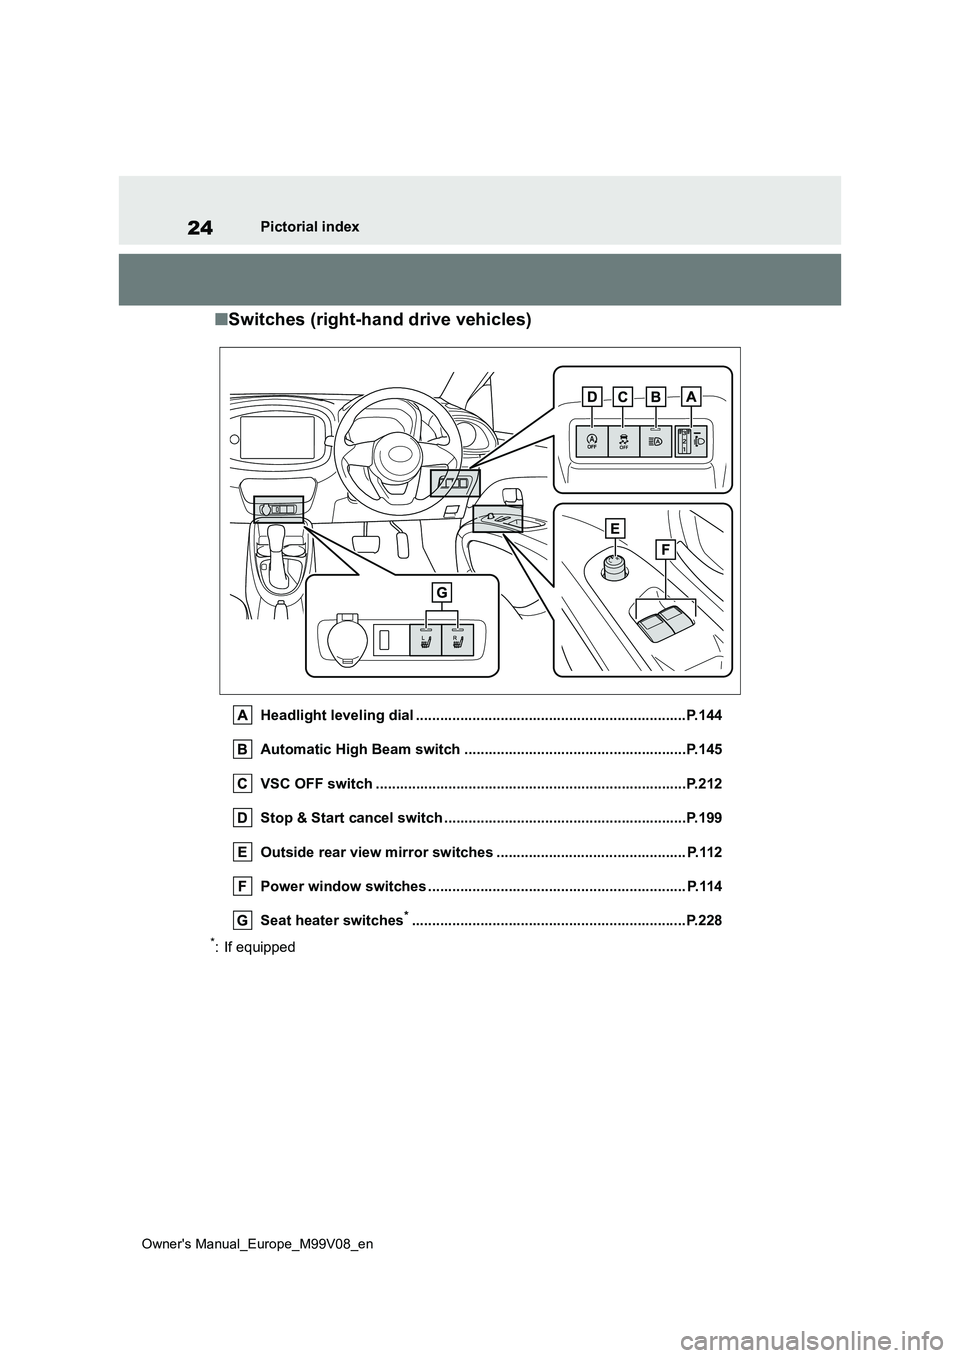 TOYOTA AYGO X 2022  Owners Manual (in English) 24
Owner's Manual_Europe_M99V08_en
Pictorial index
■Switches (right-hand drive vehicles)
Headlight leveling dial ...................................................................P.144 
Automat